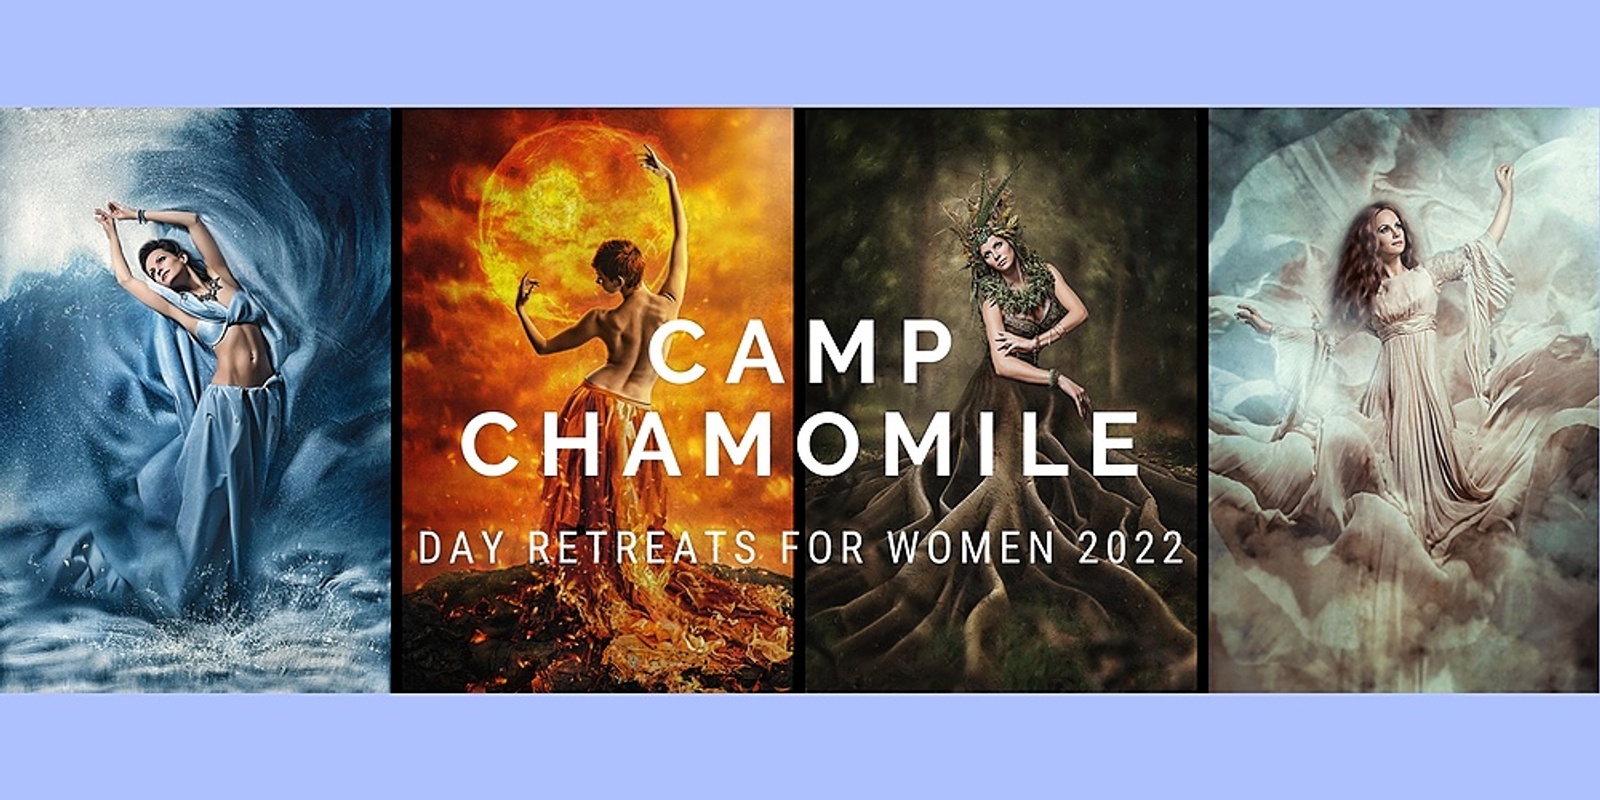 Camp Chamomile - Day Retreats for Women